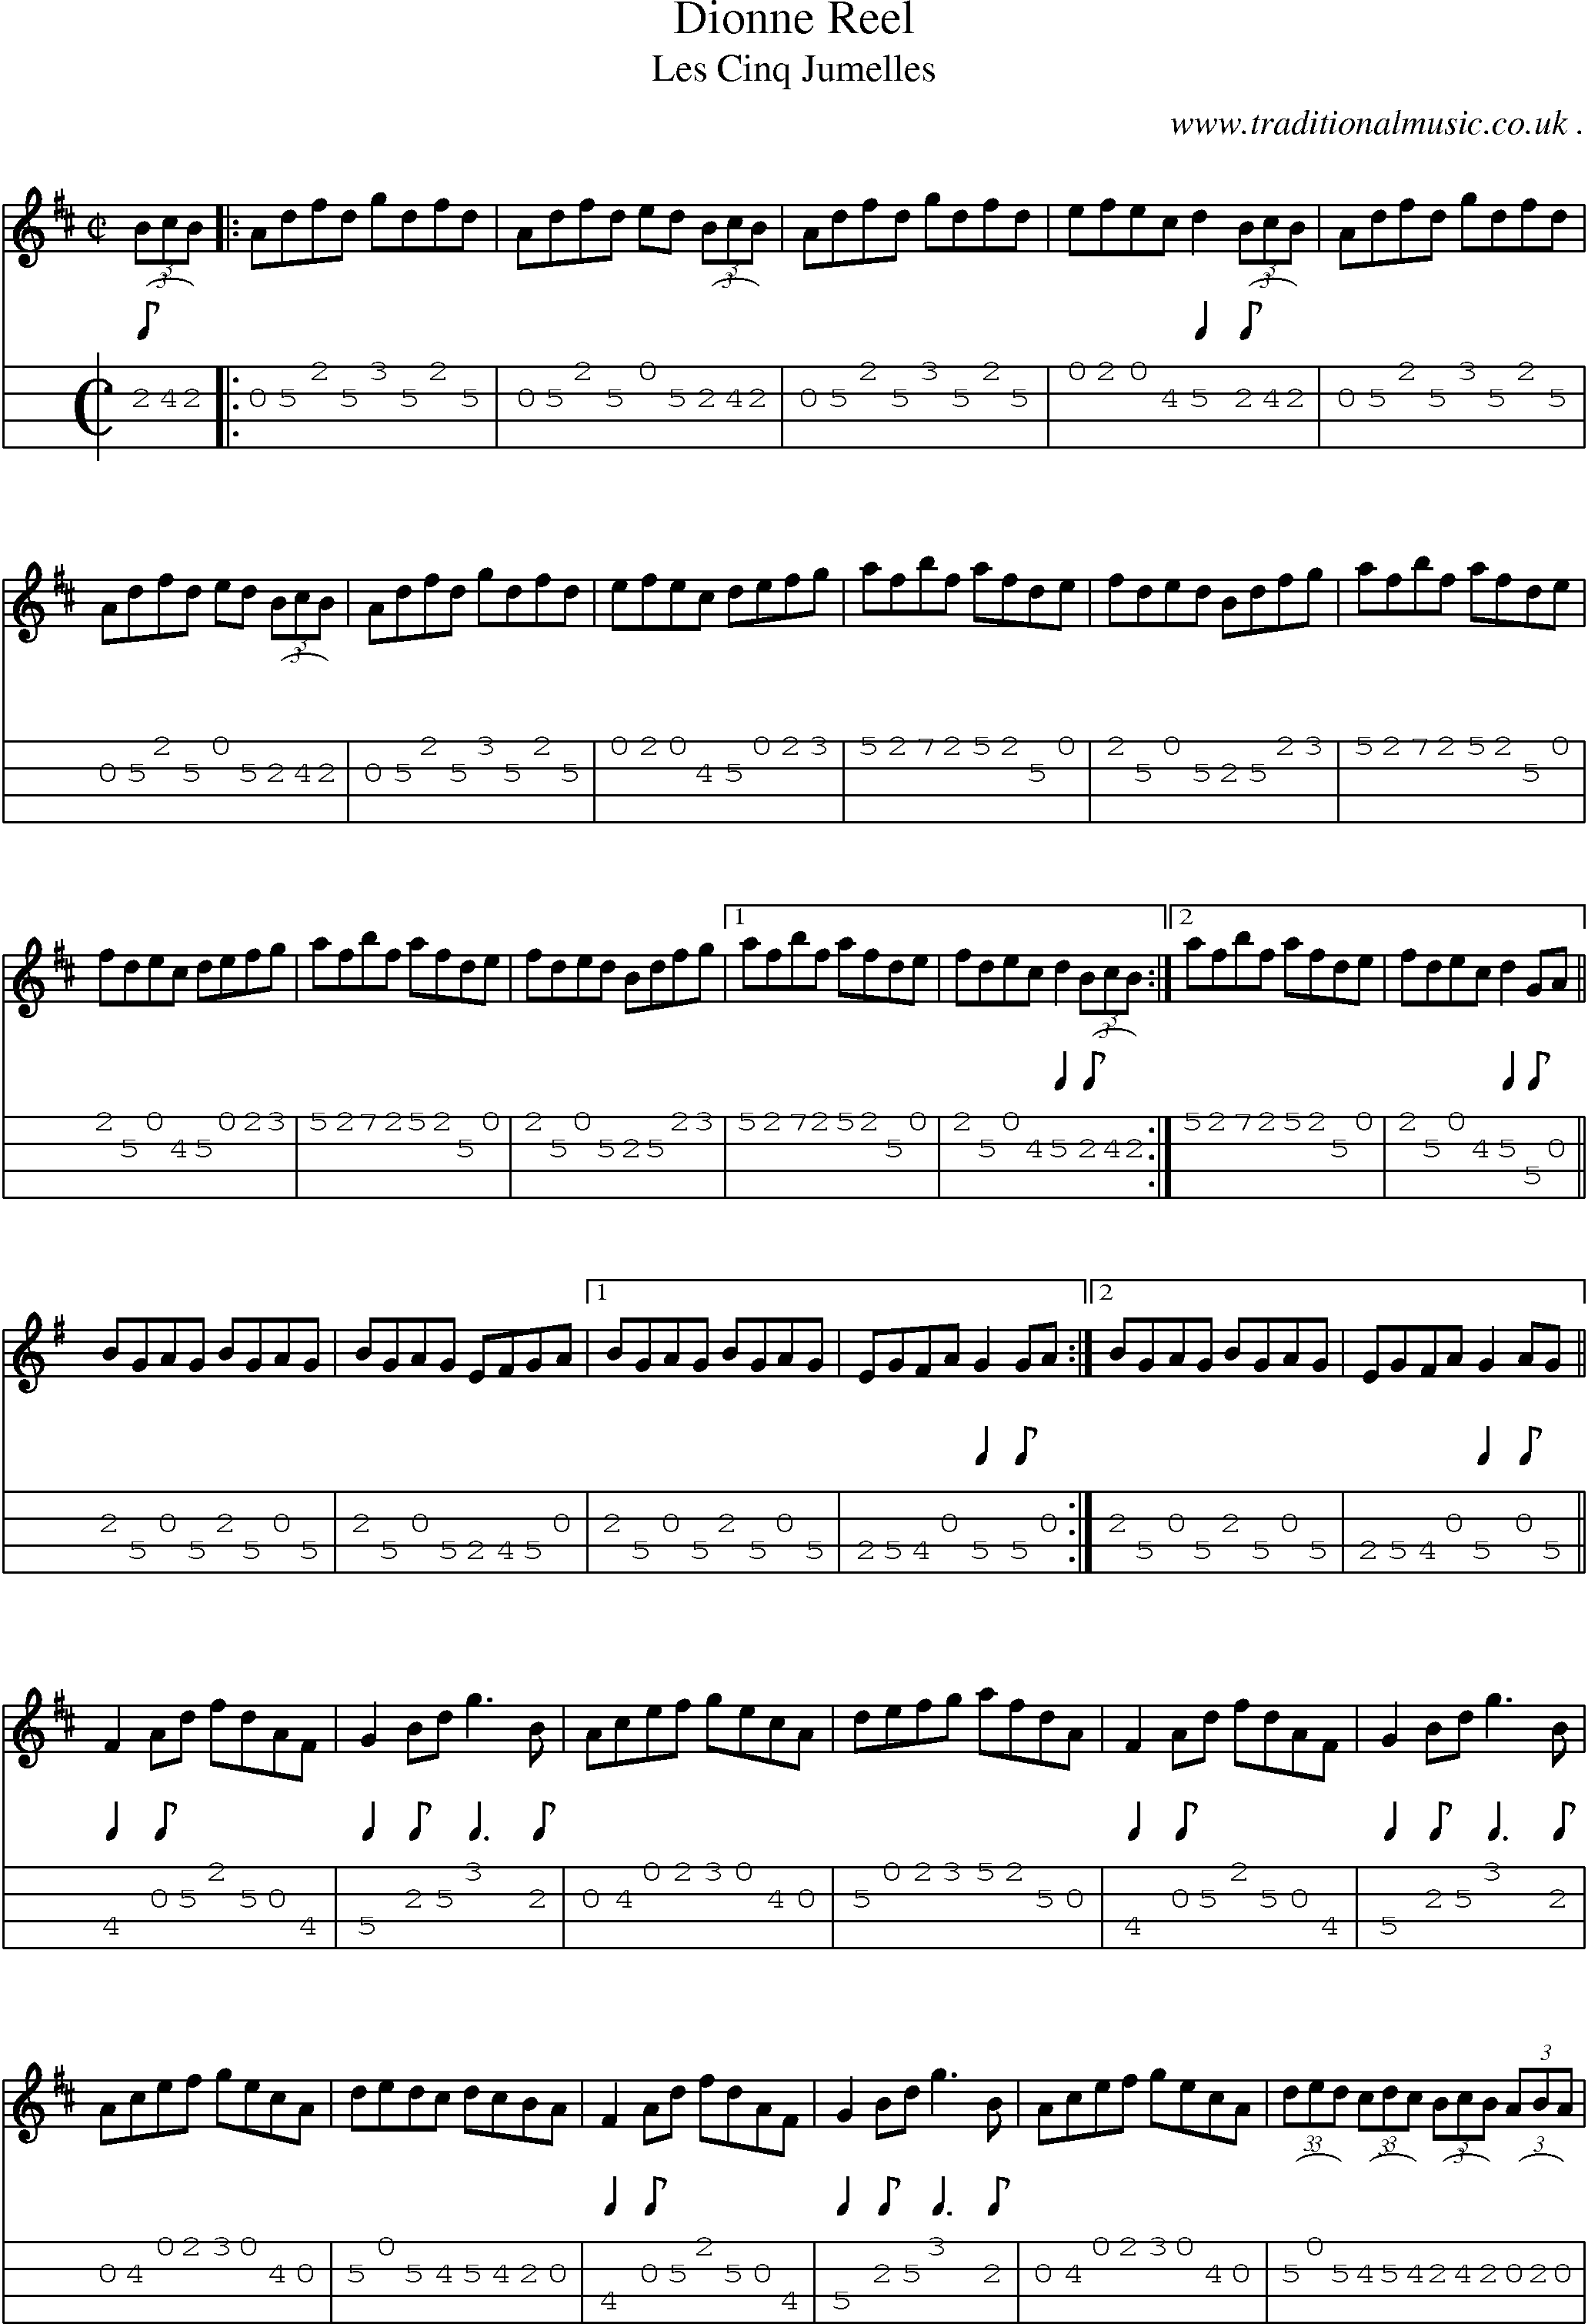 Music Score and Mandolin Tabs for Dionne Reel